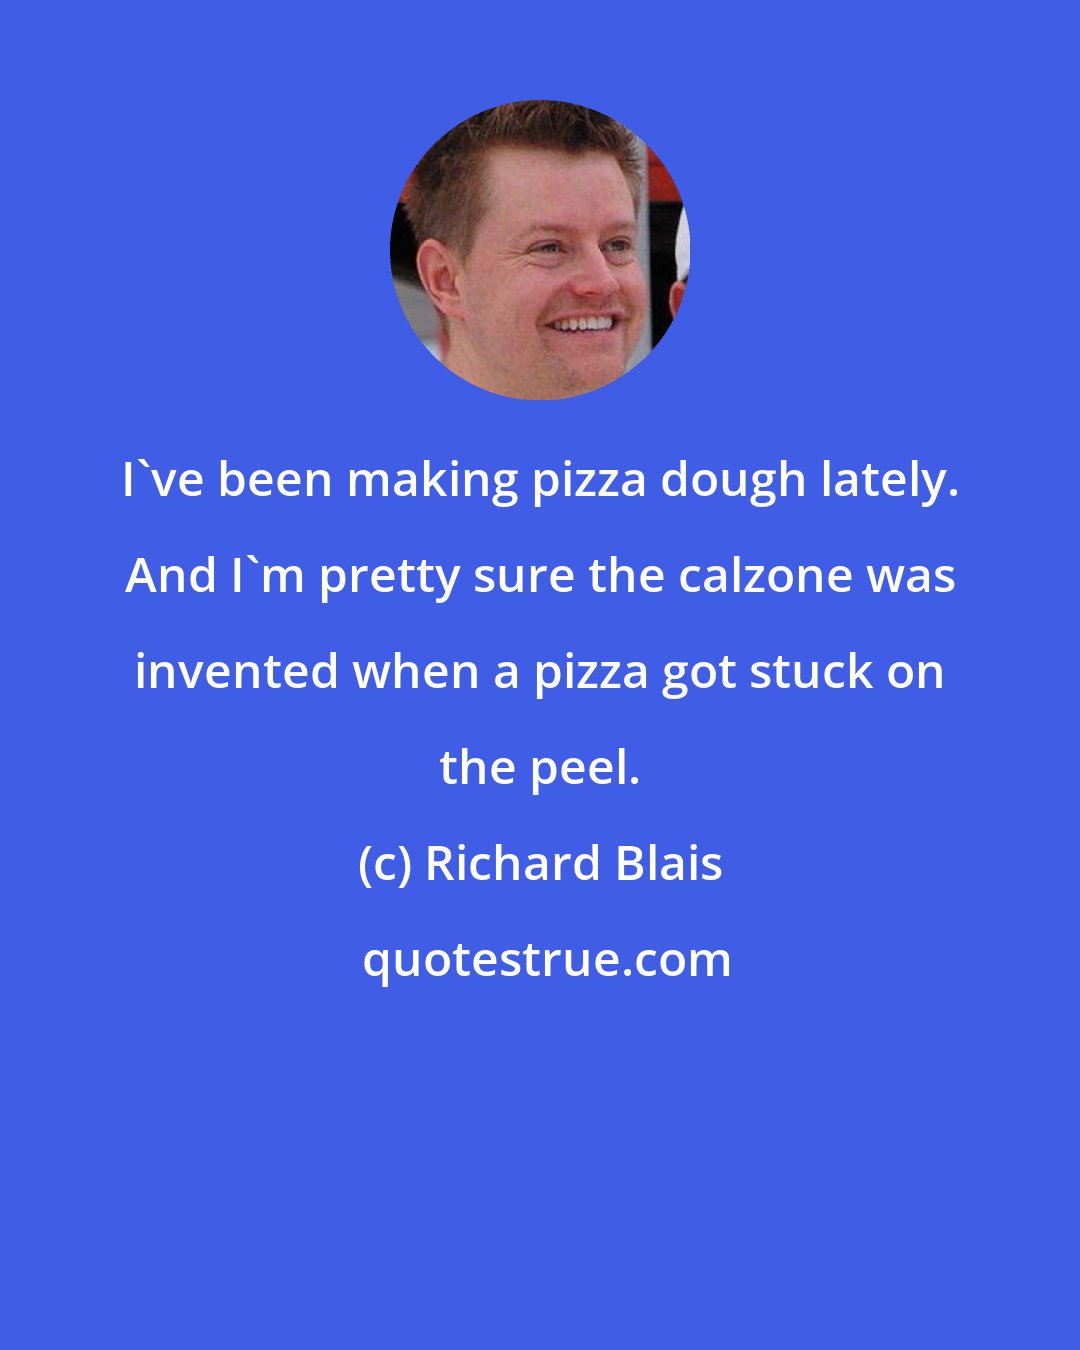 Richard Blais: I've been making pizza dough lately. And I'm pretty sure the calzone was invented when a pizza got stuck on the peel.